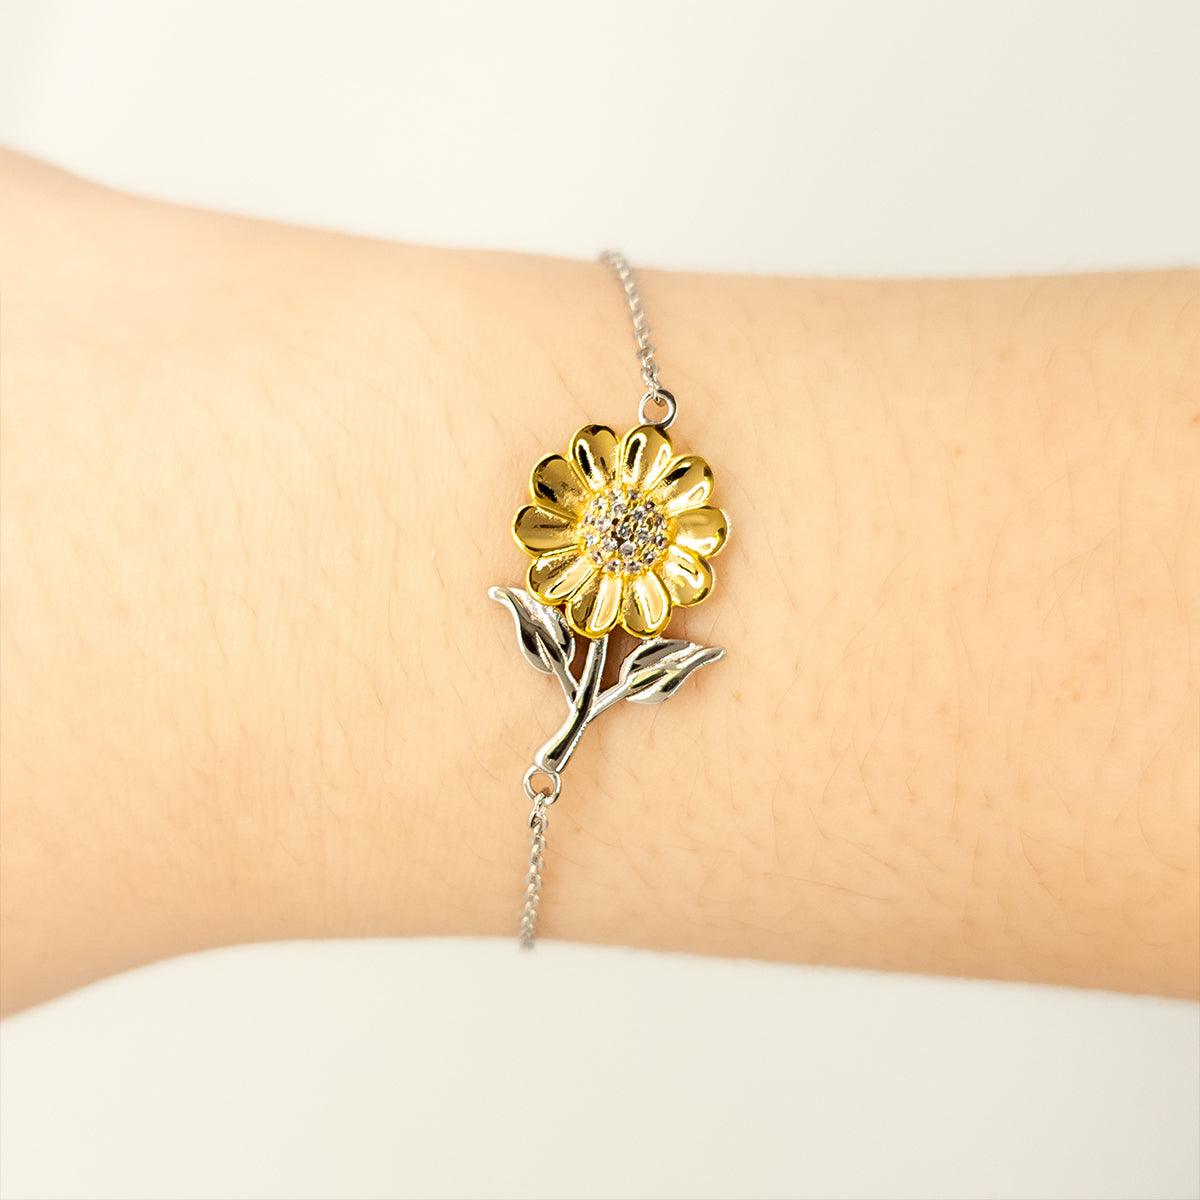 Remarkable Pediatrician Gifts, Your dedication and hard work, Inspirational Birthday Christmas Unique Sunflower Bracelet For Pediatrician, Coworkers, Men, Women, Friends - Mallard Moon Gift Shop